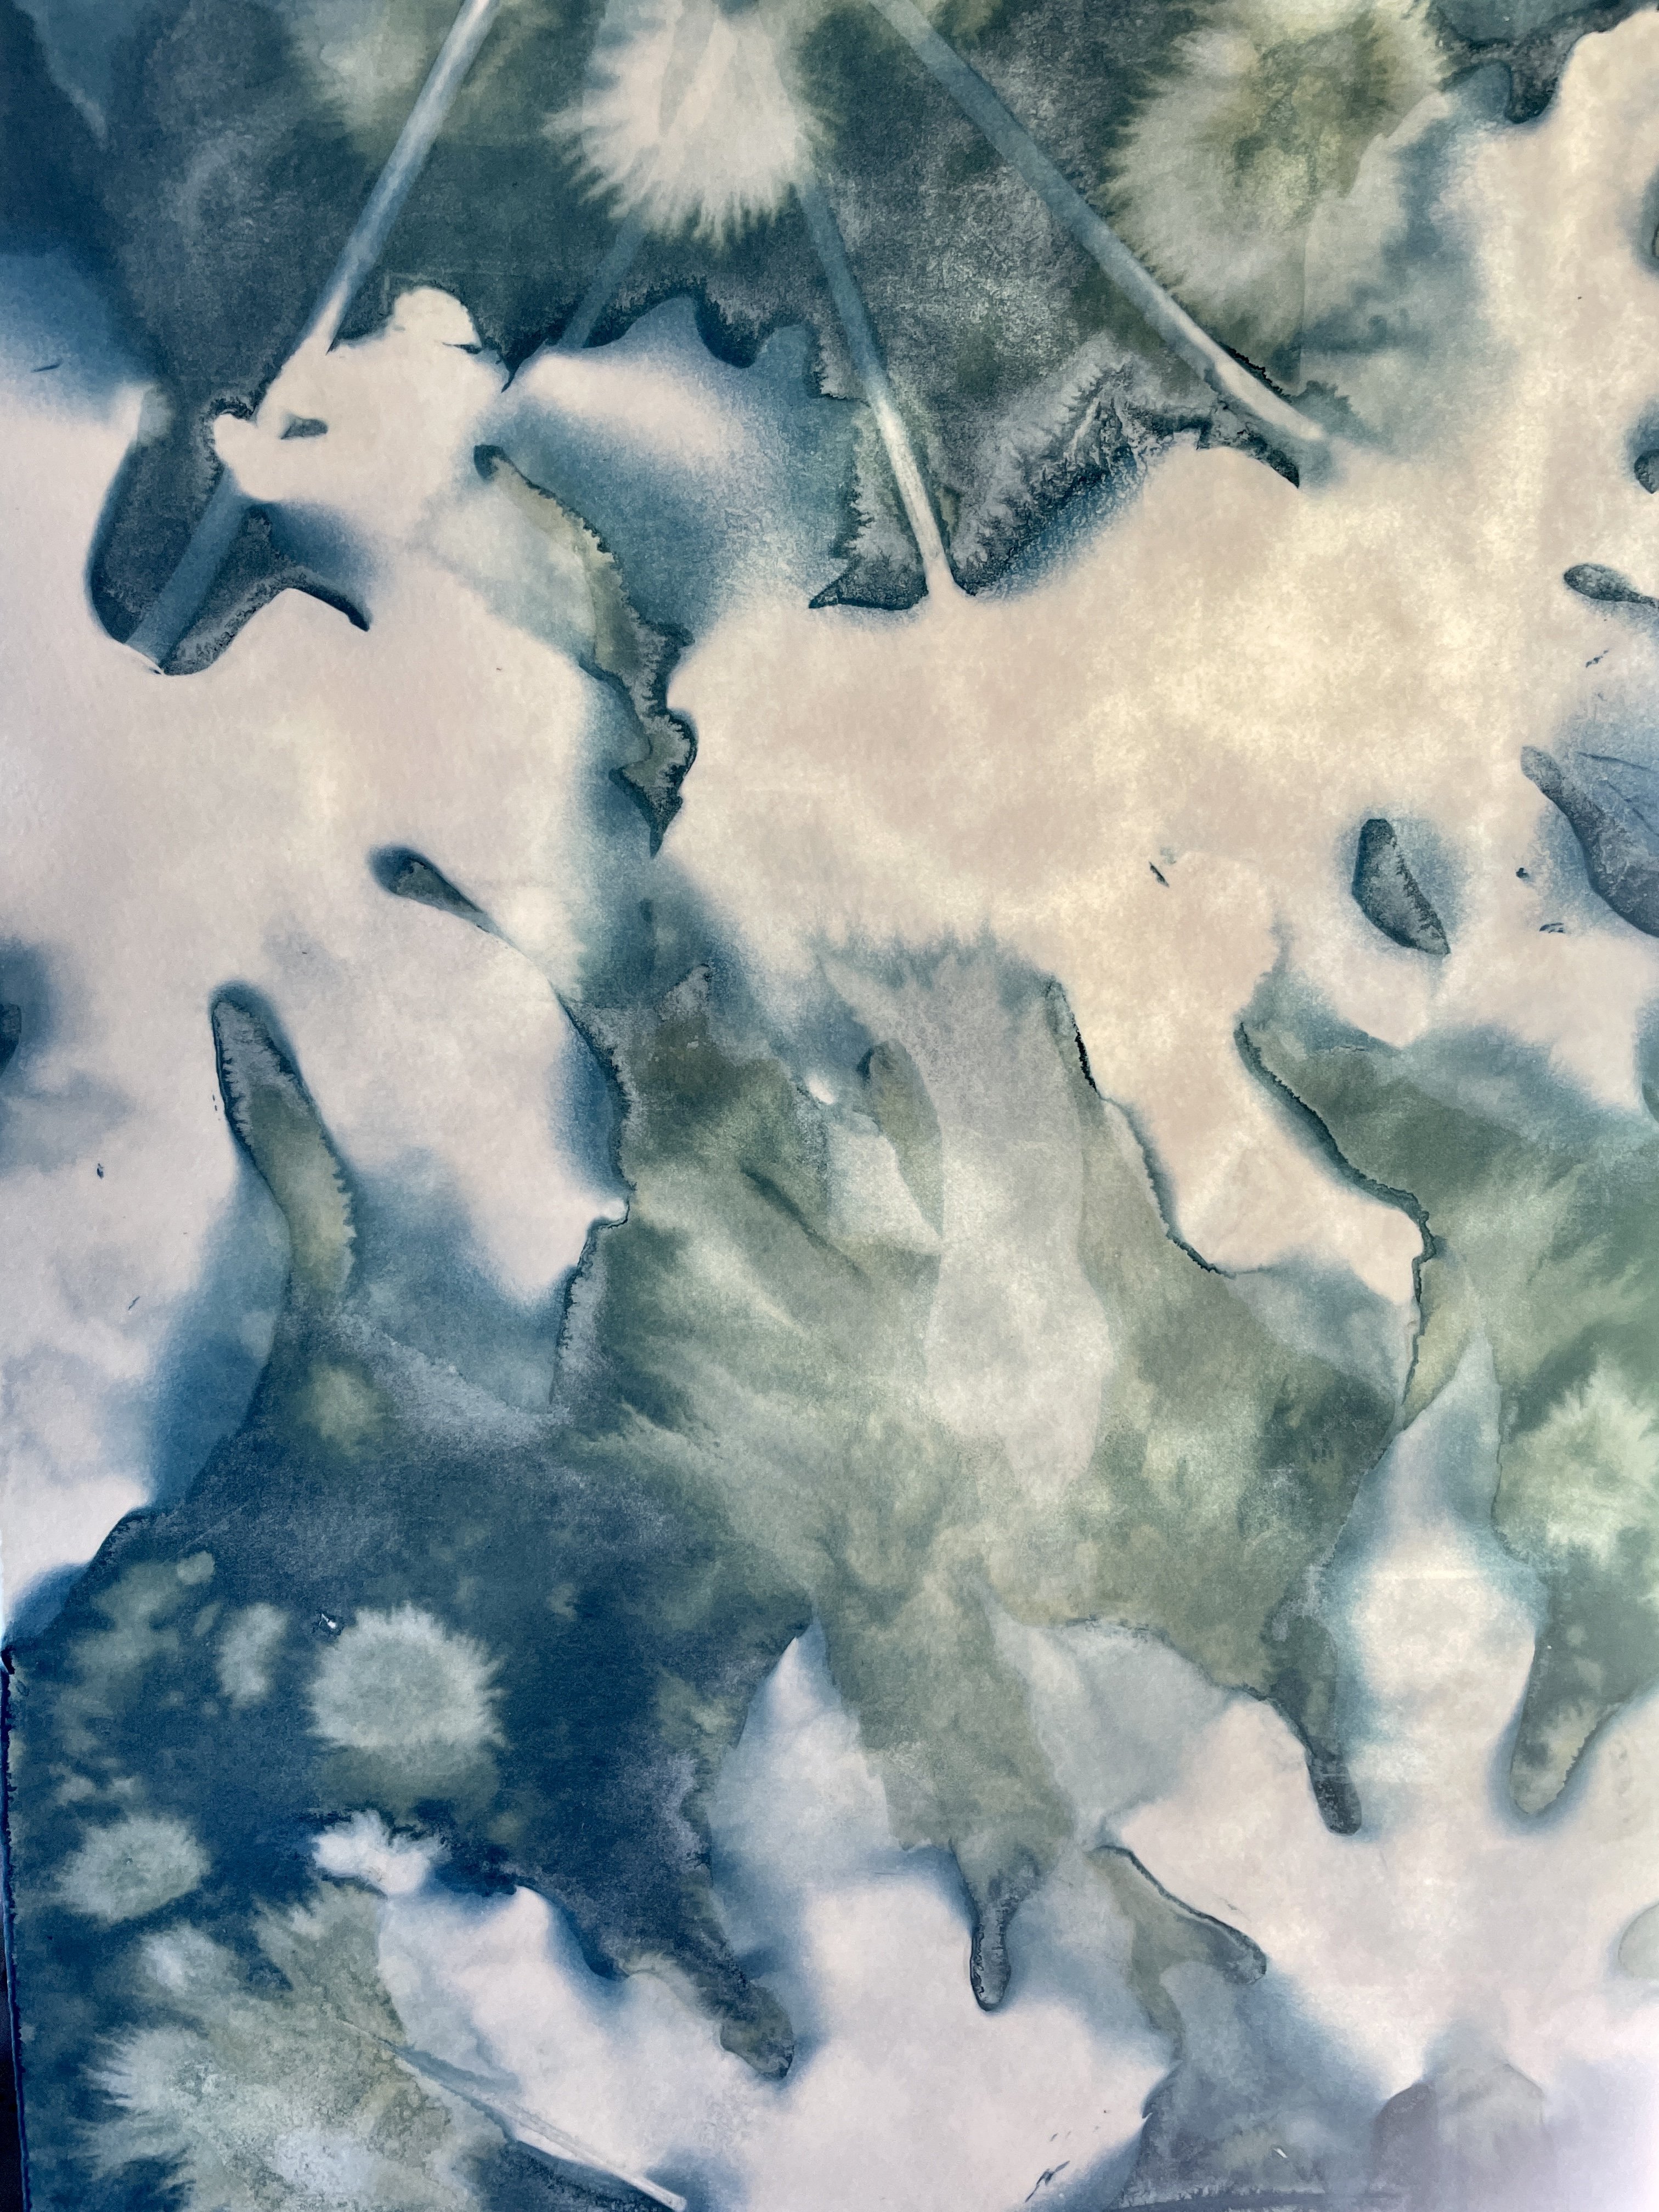 Artful Cyanotypes - Wet Cyanotypes and creating colours